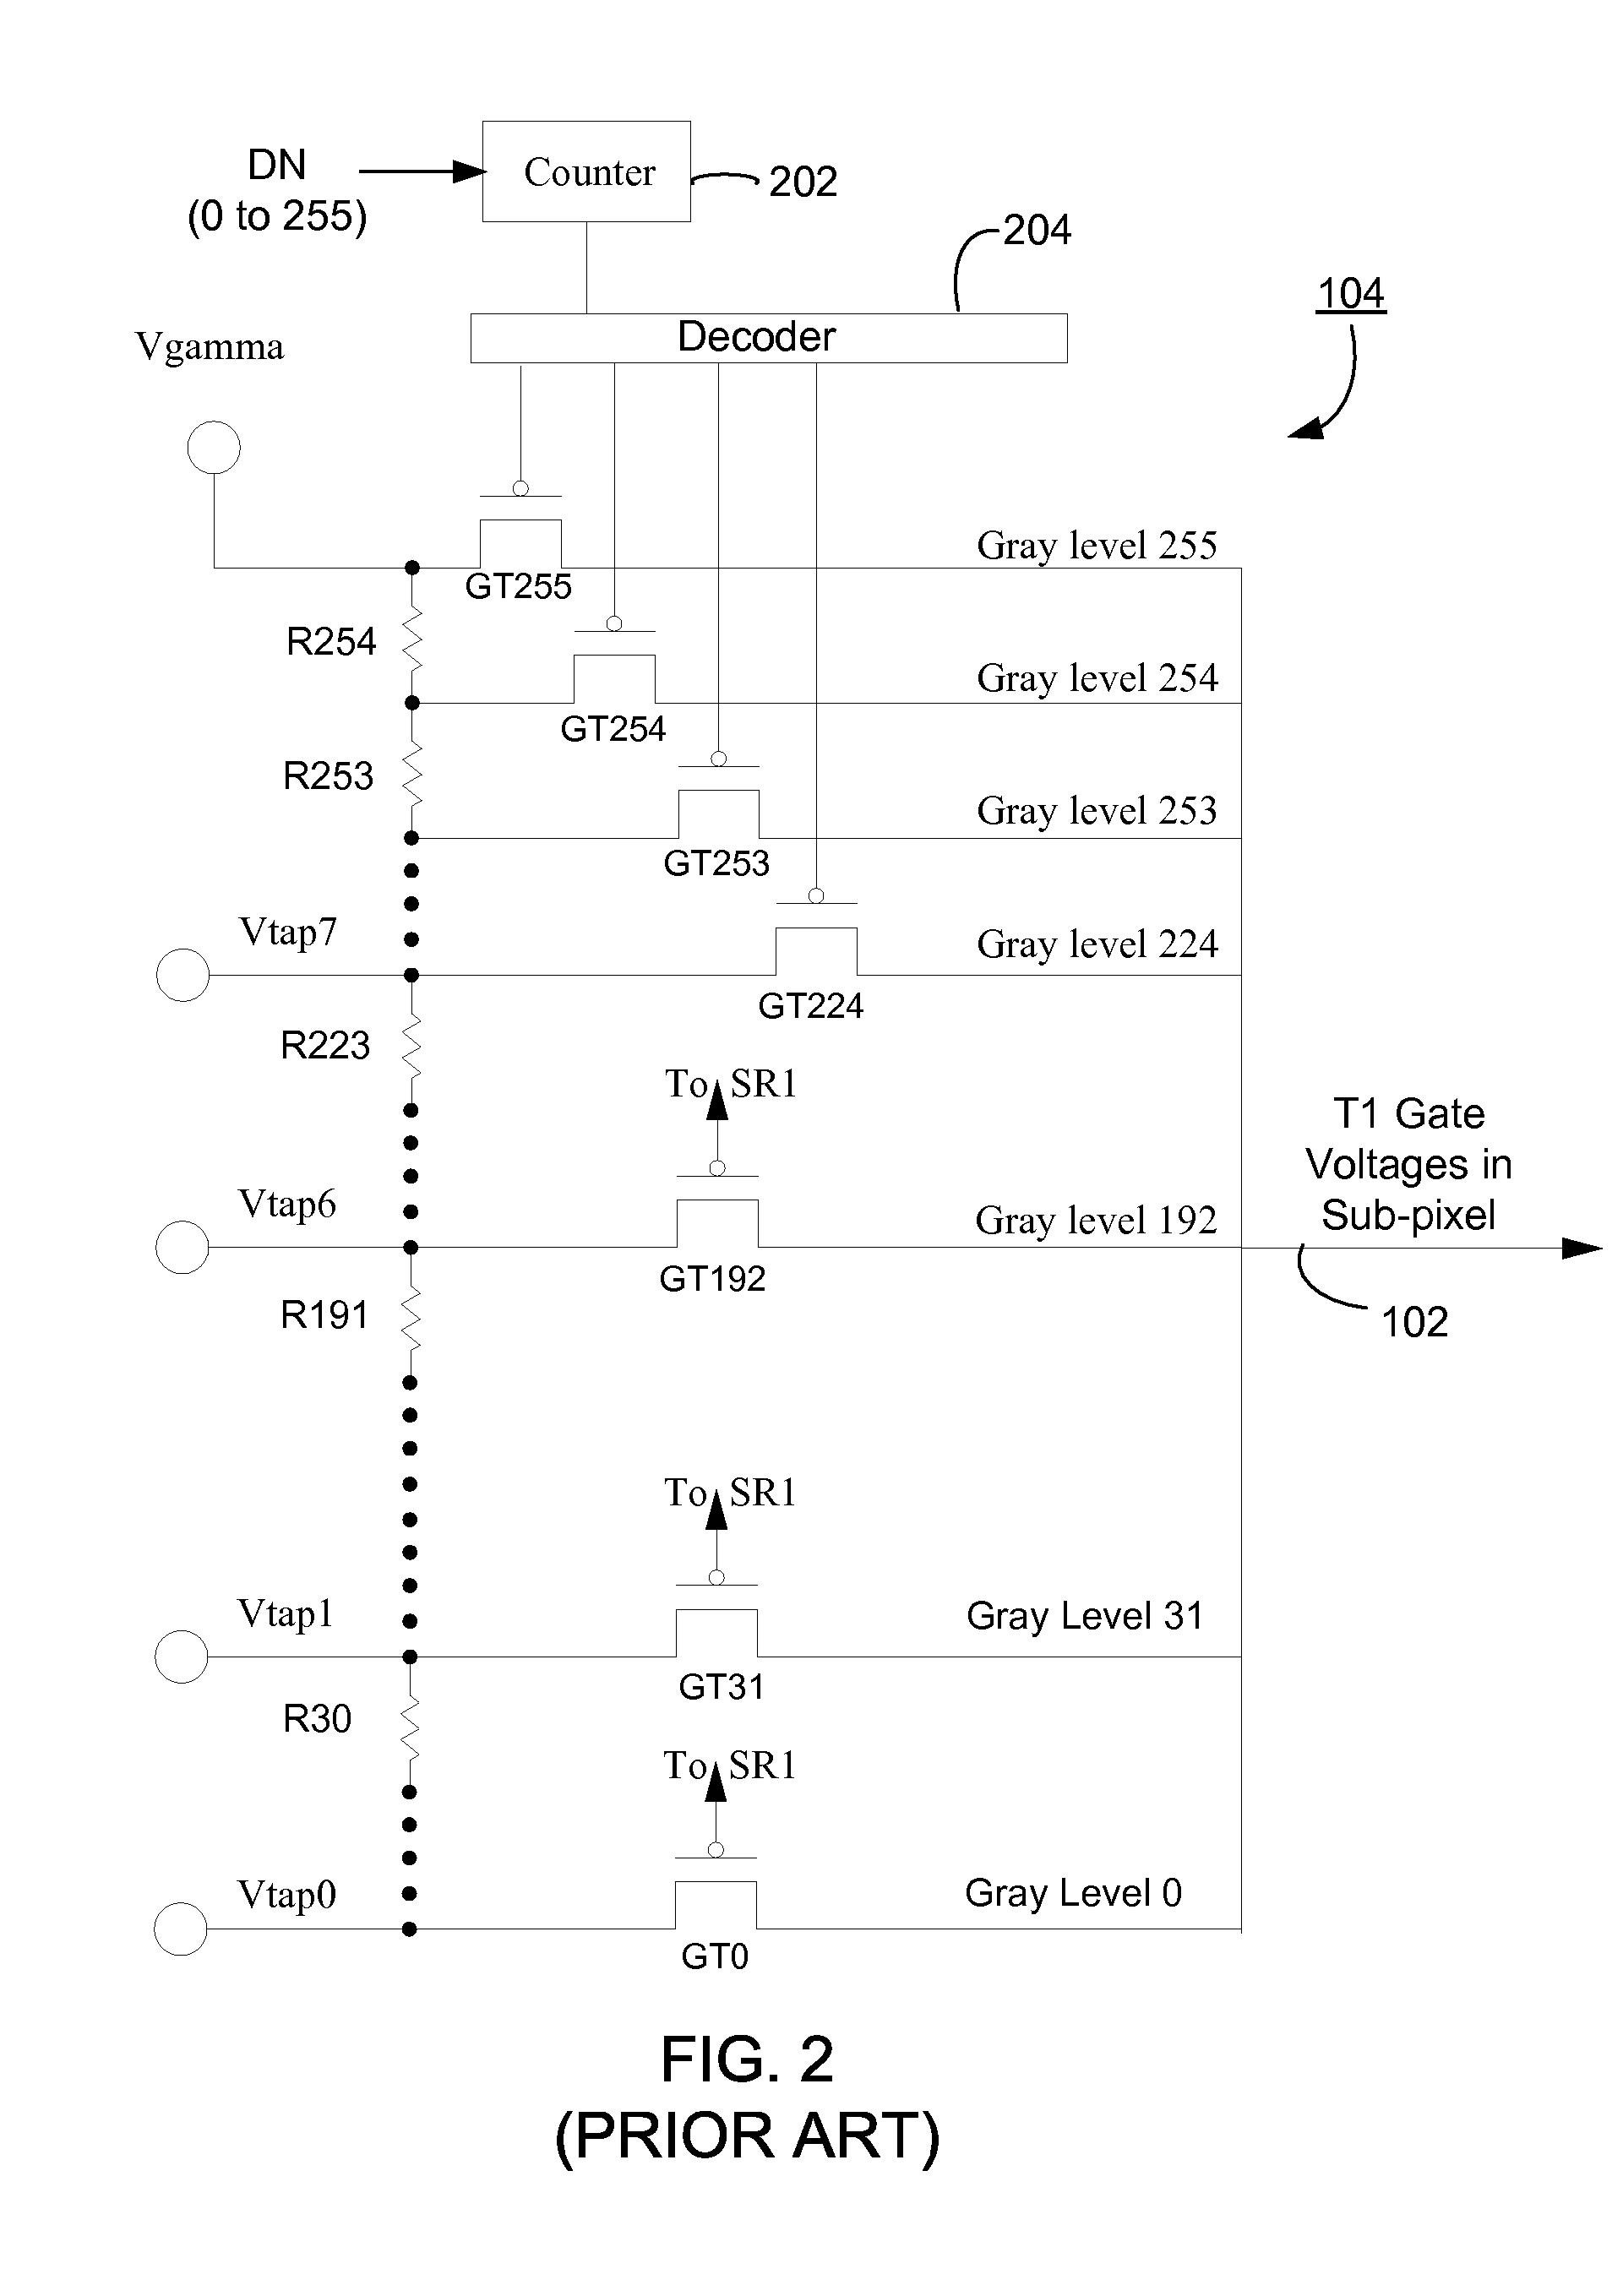 Emission control in aged active matrix OLED display using voltage ratio or current ratio